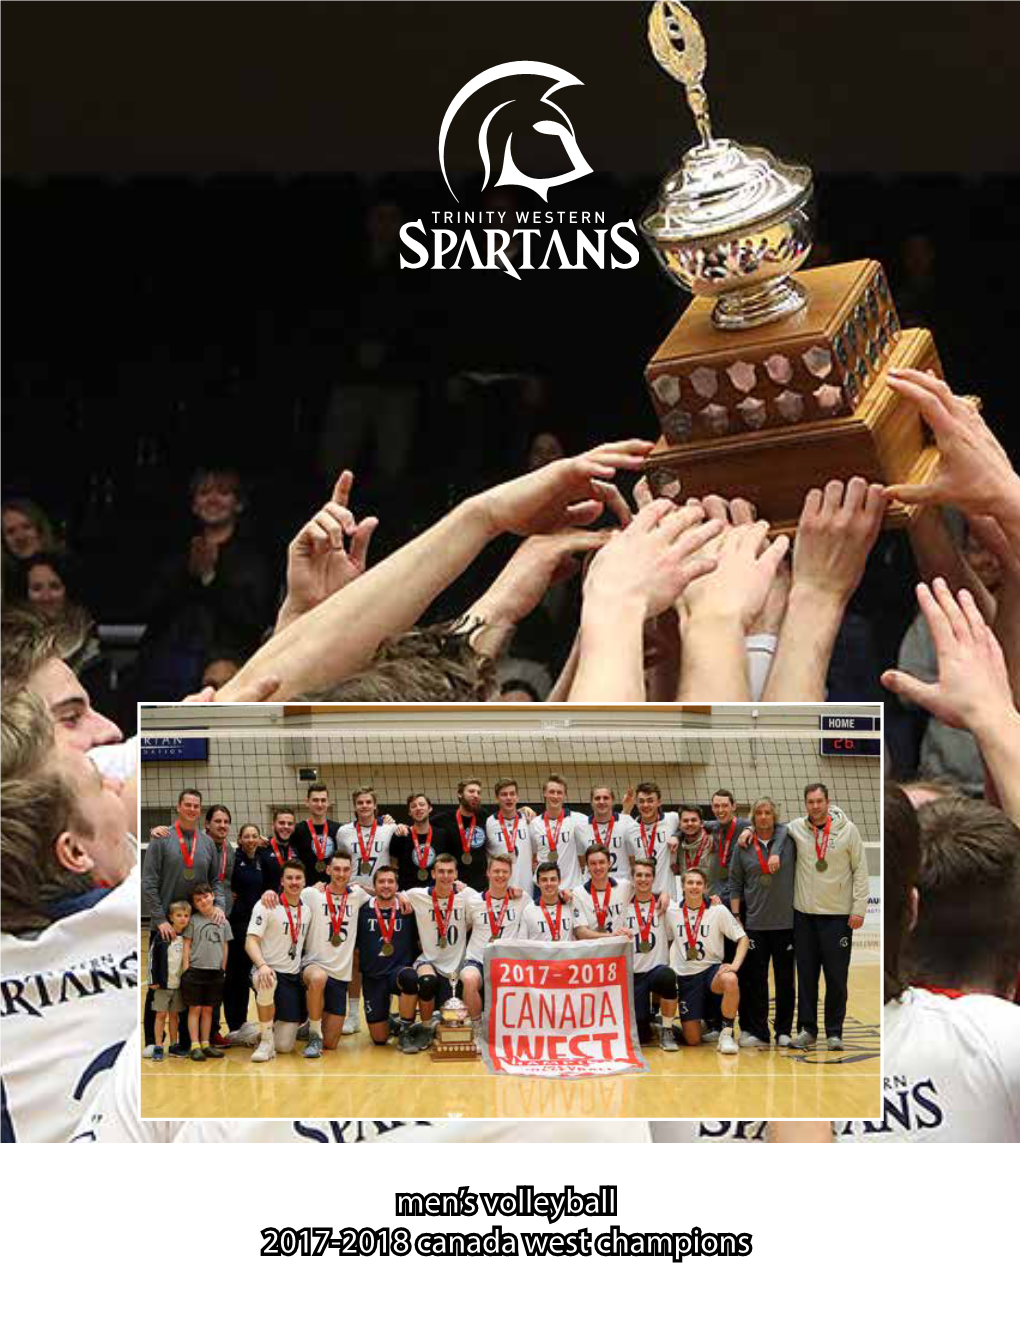 Men's Volleyball 2017-2018 Canada West Champions